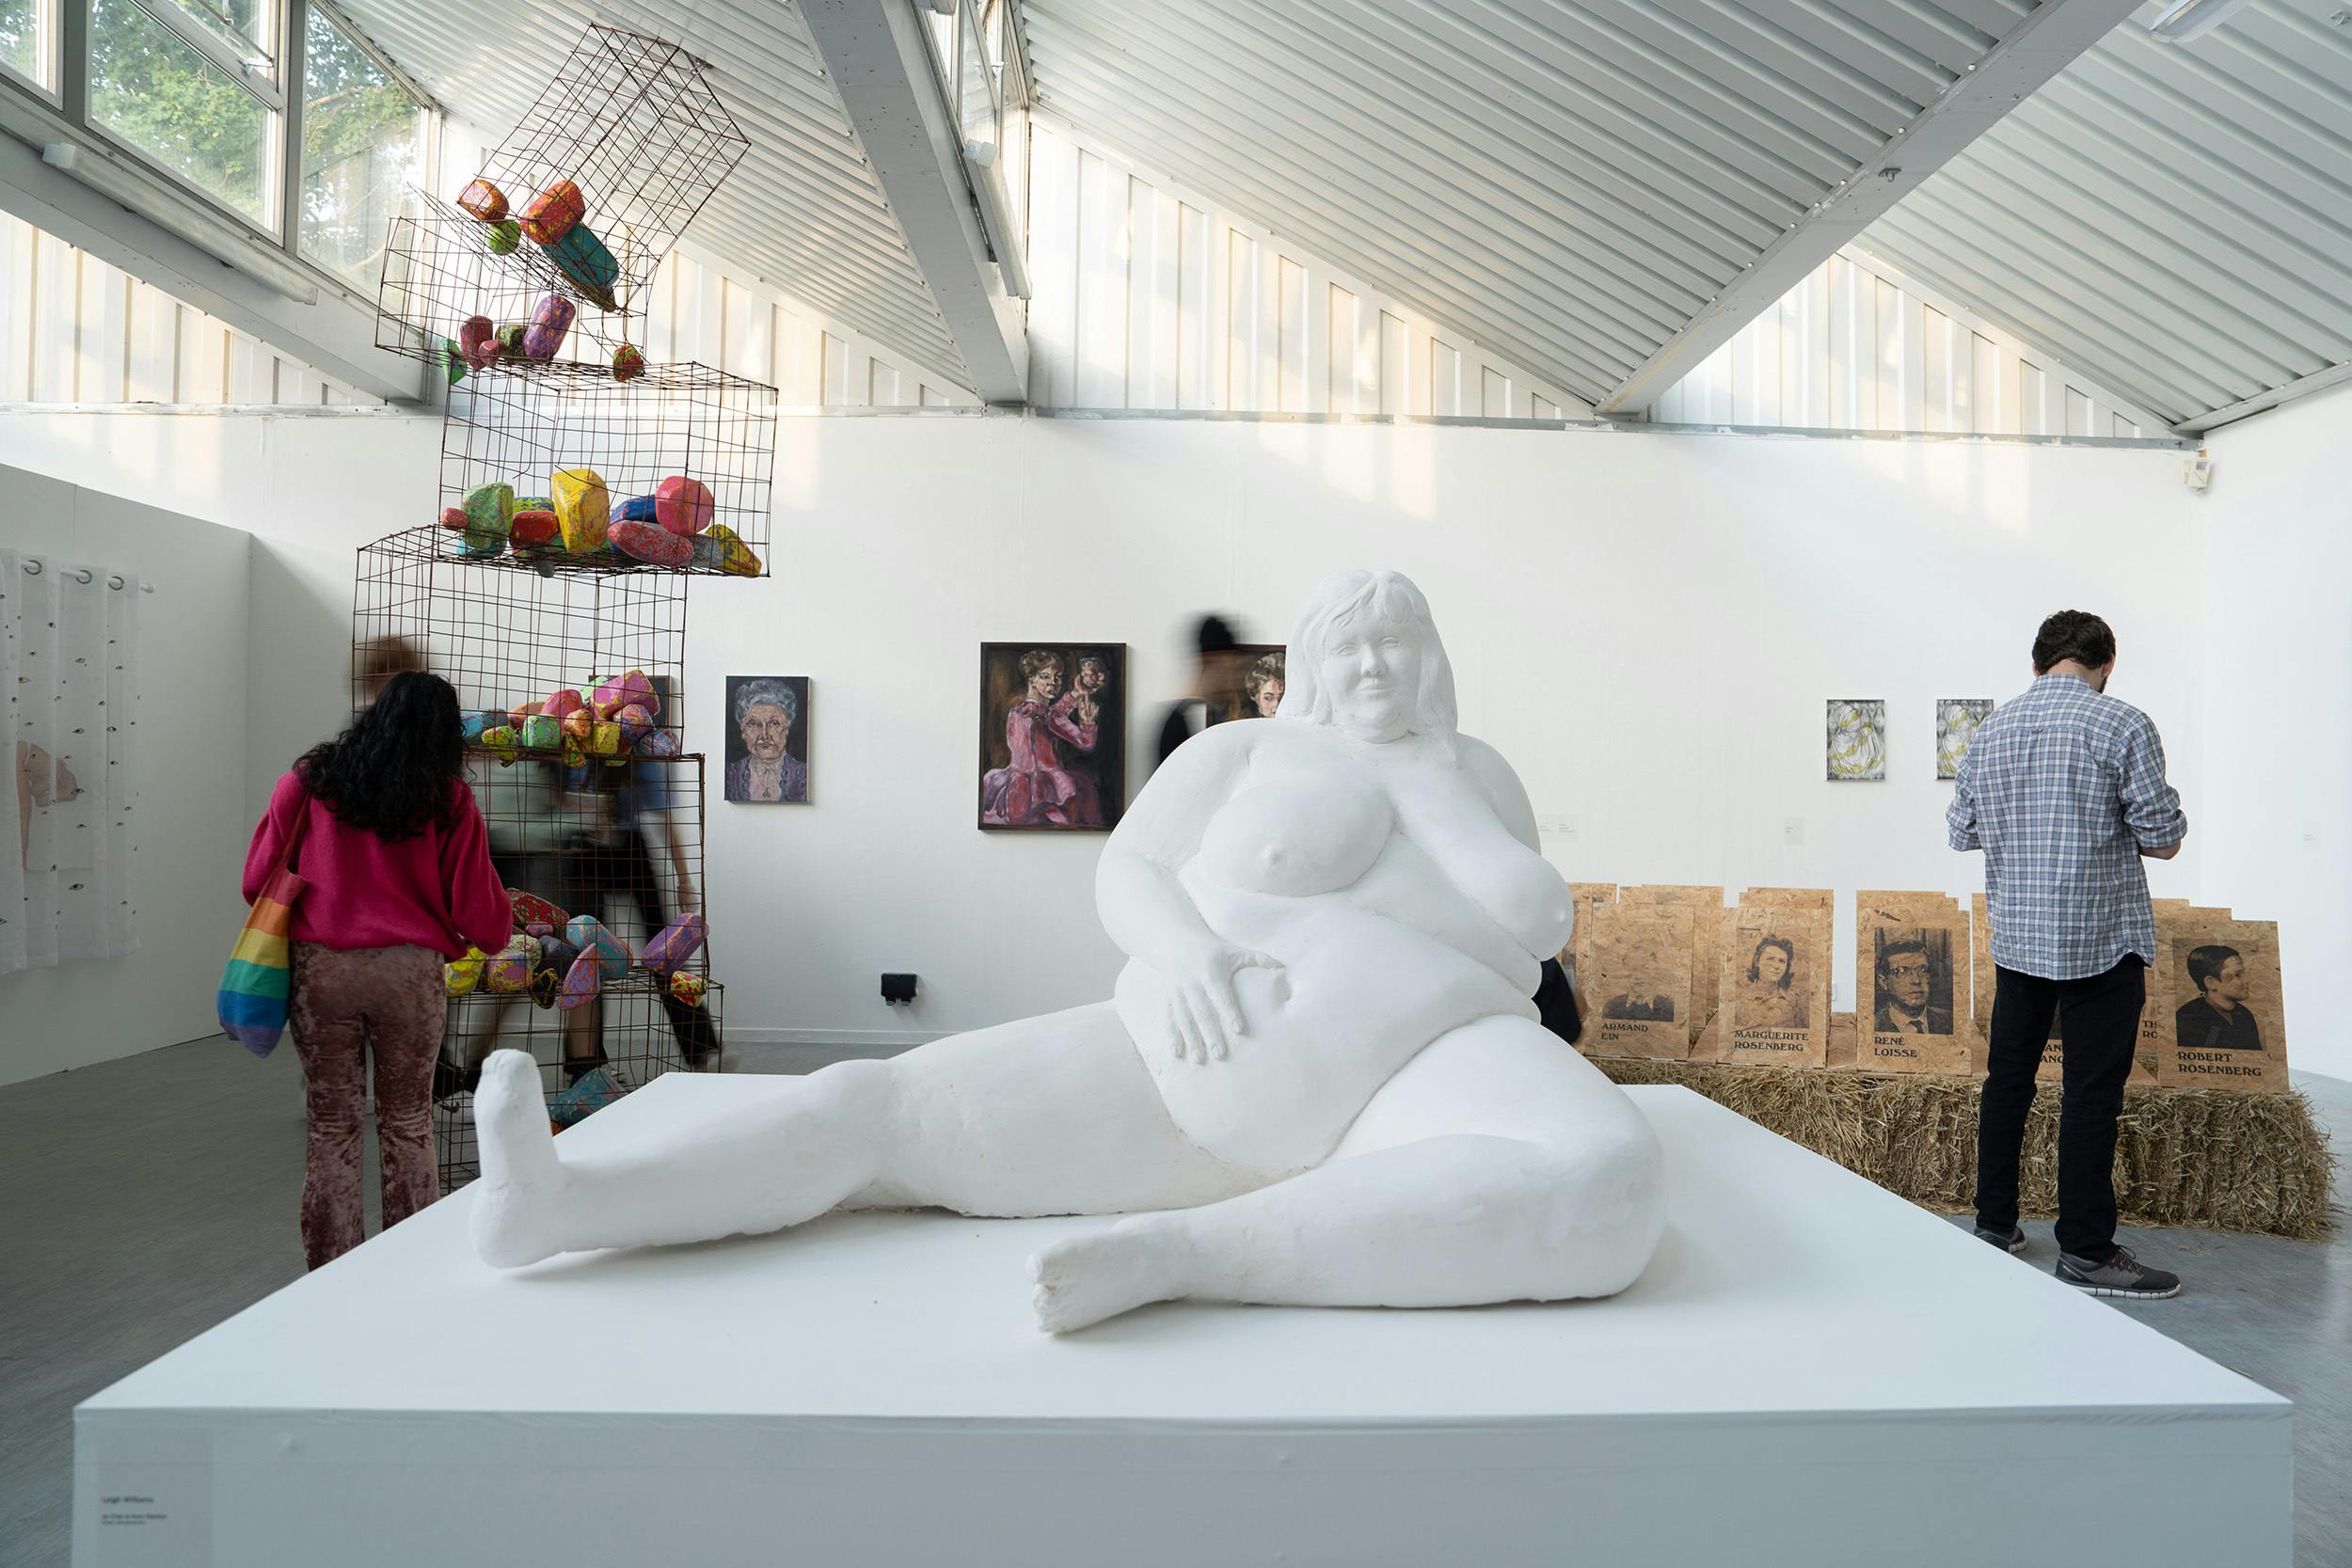 fine art studios over the summer shows – there's a large sculpture of a naked figure proudly resting their hand on to their bare belly